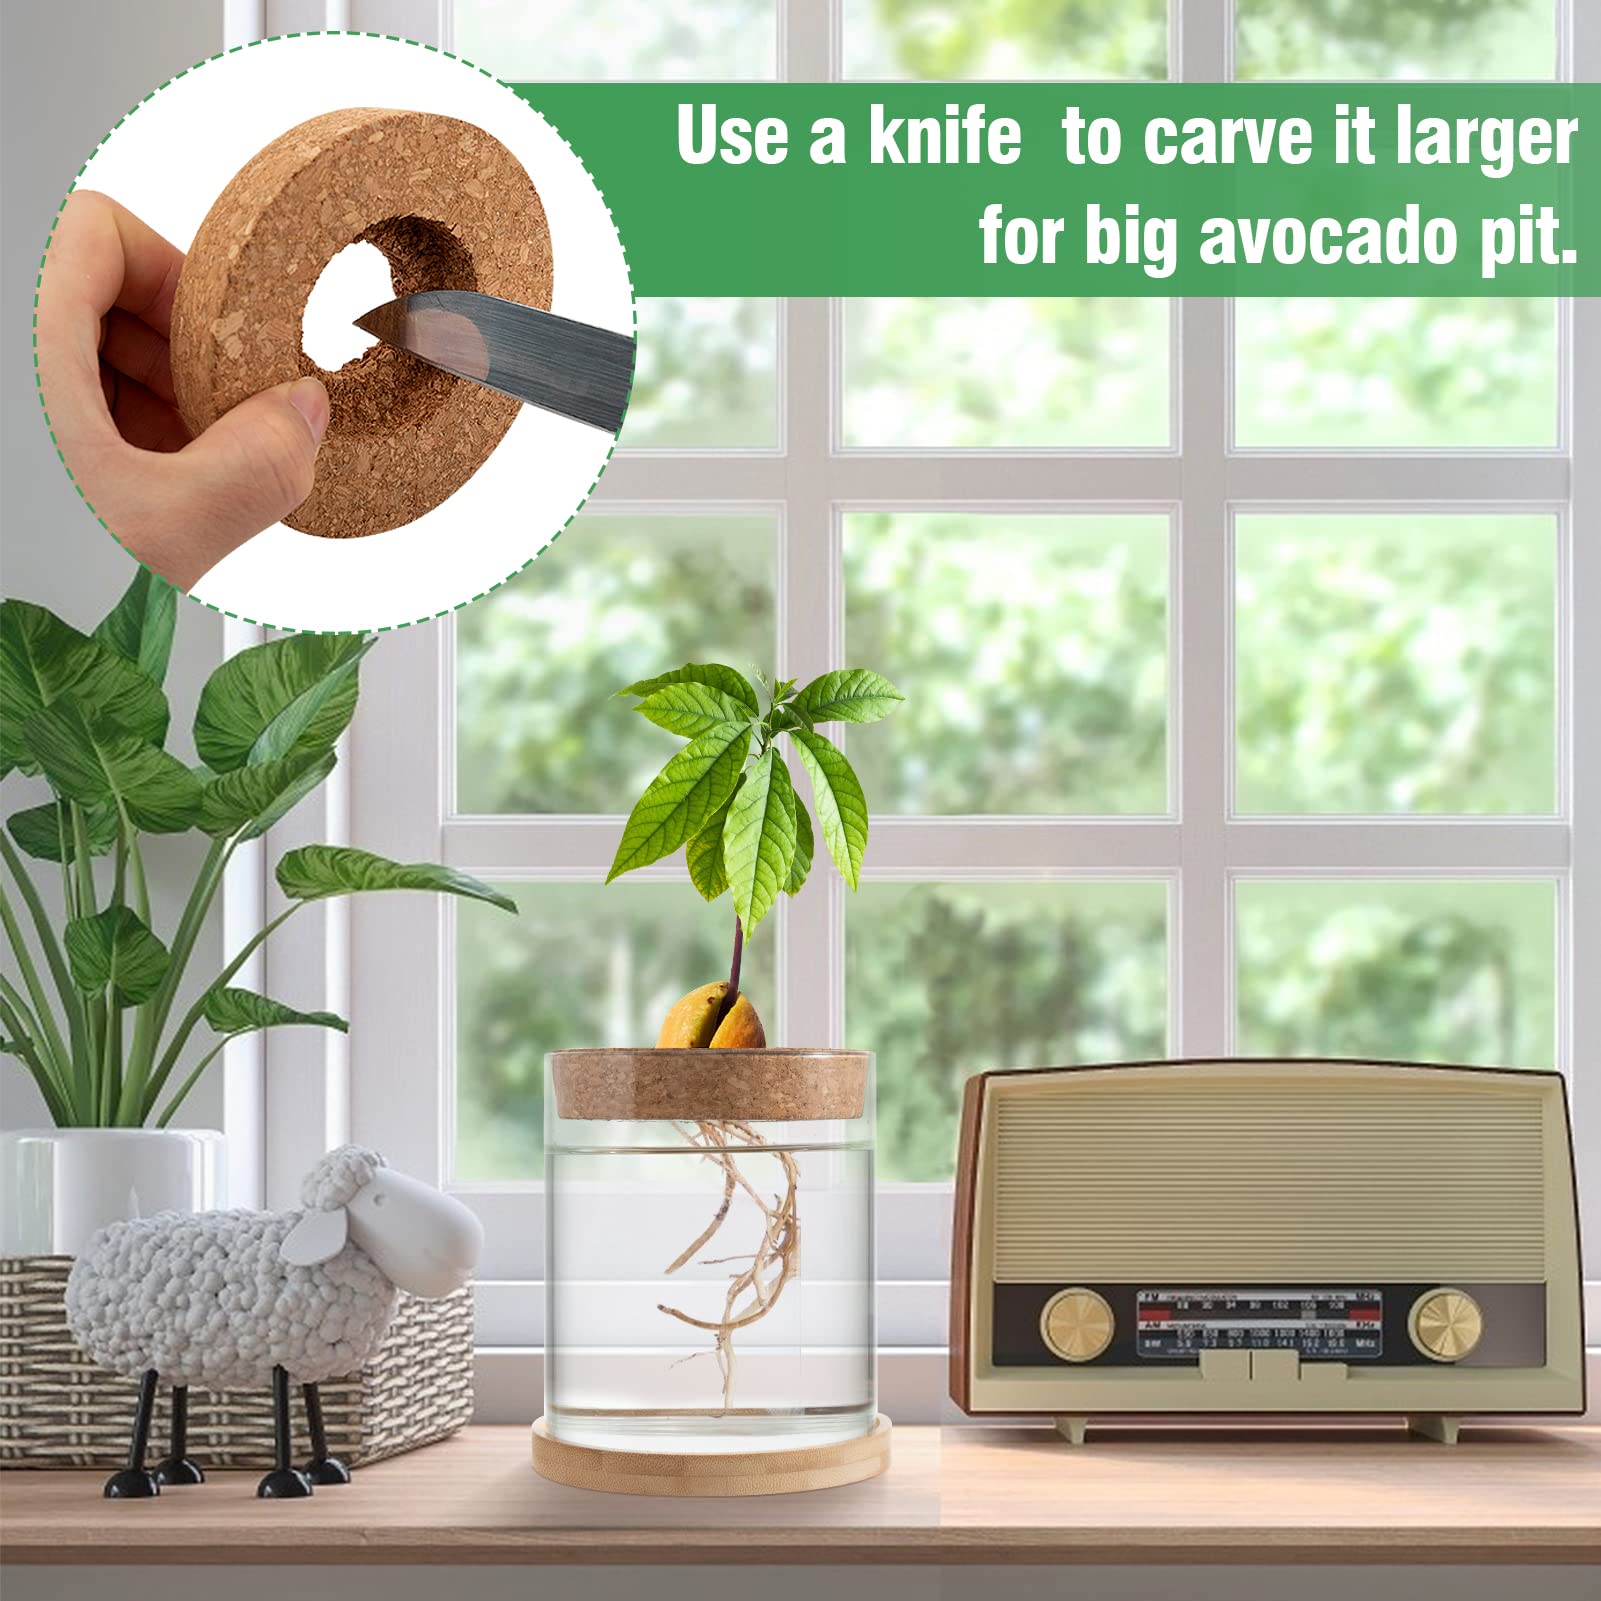 Biggun Avocado Tree Growing Kit - Avocado Pit Planting Bowl with Cork and Wooden Base, Cultivating Seedlings in Novel Way, Great Gift for Family Friends and Gardening Enthusiasts